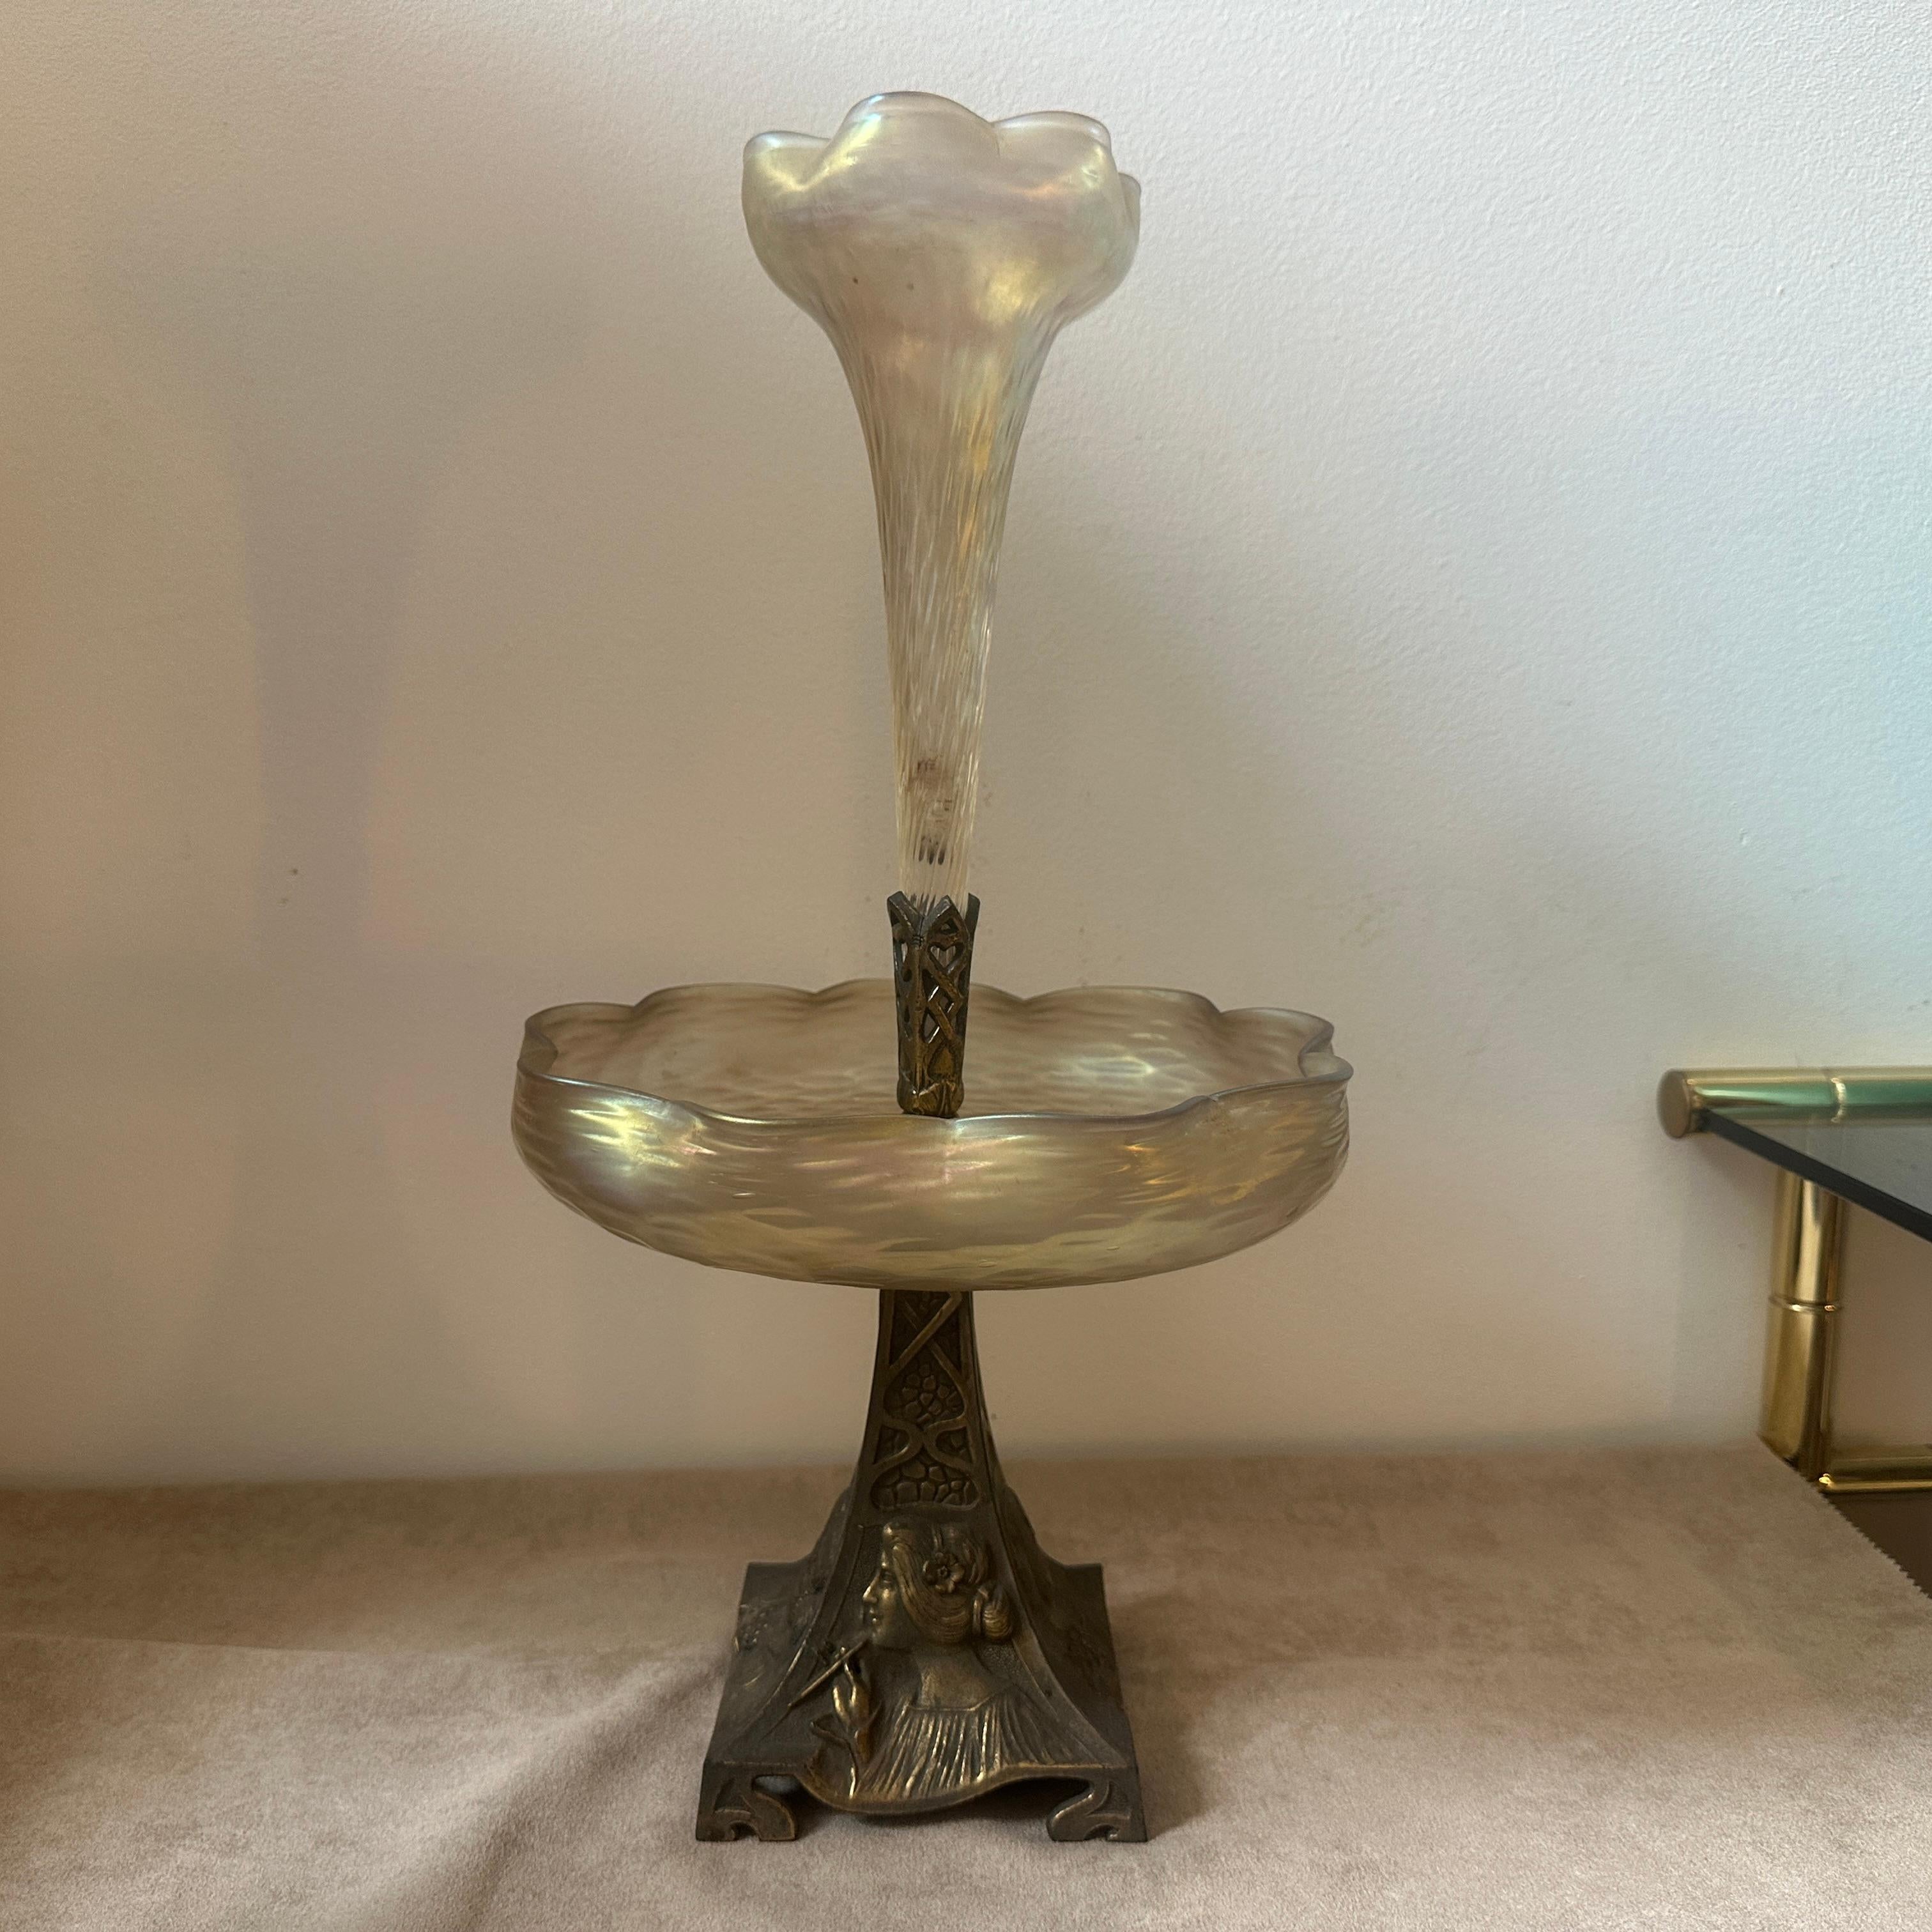 A czech brass and iridescent glass centerpiece use to display fruit and flowers, brass it's in original patina, glass it's in very good condition, it has only a small line long 0,5 inch, you can see it in the last pic. The centerpiece is a